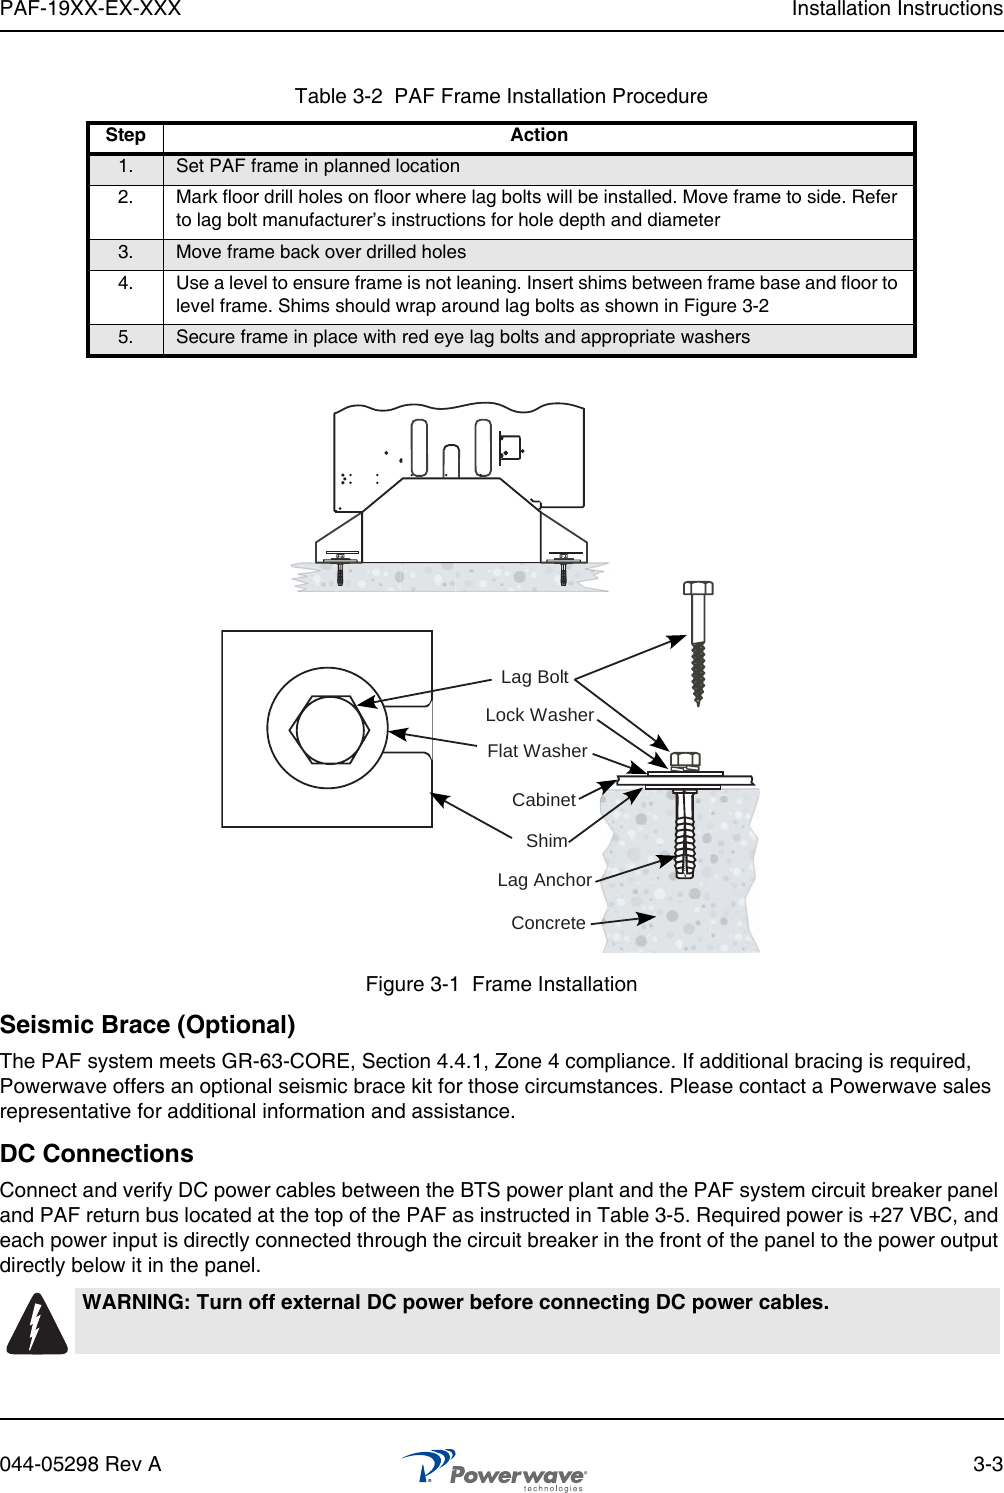 PAF-19XX-EX-XXX Installation Instructions044-05298 Rev A 3-3Figure 3-1  Frame InstallationSeismic Brace (Optional)The PAF system meets GR-63-CORE, Section 4.4.1, Zone 4 compliance. If additional bracing is required, Powerwave offers an optional seismic brace kit for those circumstances. Please contact a Powerwave sales representative for additional information and assistance.DC ConnectionsConnect and verify DC power cables between the BTS power plant and the PAF system circuit breaker panel and PAF return bus located at the top of the PAF as instructed in Table 3-5. Required power is +27 VBC, and each power input is directly connected through the circuit breaker in the front of the panel to the power output directly below it in the panel.Table 3-2  PAF Frame Installation ProcedureStep Action1. Set PAF frame in planned location2. Mark floor drill holes on floor where lag bolts will be installed. Move frame to side. Refer to lag bolt manufacturer’s instructions for hole depth and diameter3. Move frame back over drilled holes4. Use a level to ensure frame is not leaning. Insert shims between frame base and floor to level frame. Shims should wrap around lag bolts as shown in Figure 3-25. Secure frame in place with red eye lag bolts and appropriate washersWARNING: Turn off external DC power before connecting DC power cables.ConcreteLag AnchorShimCabinetFlat WasherLock WasherLag Bolt